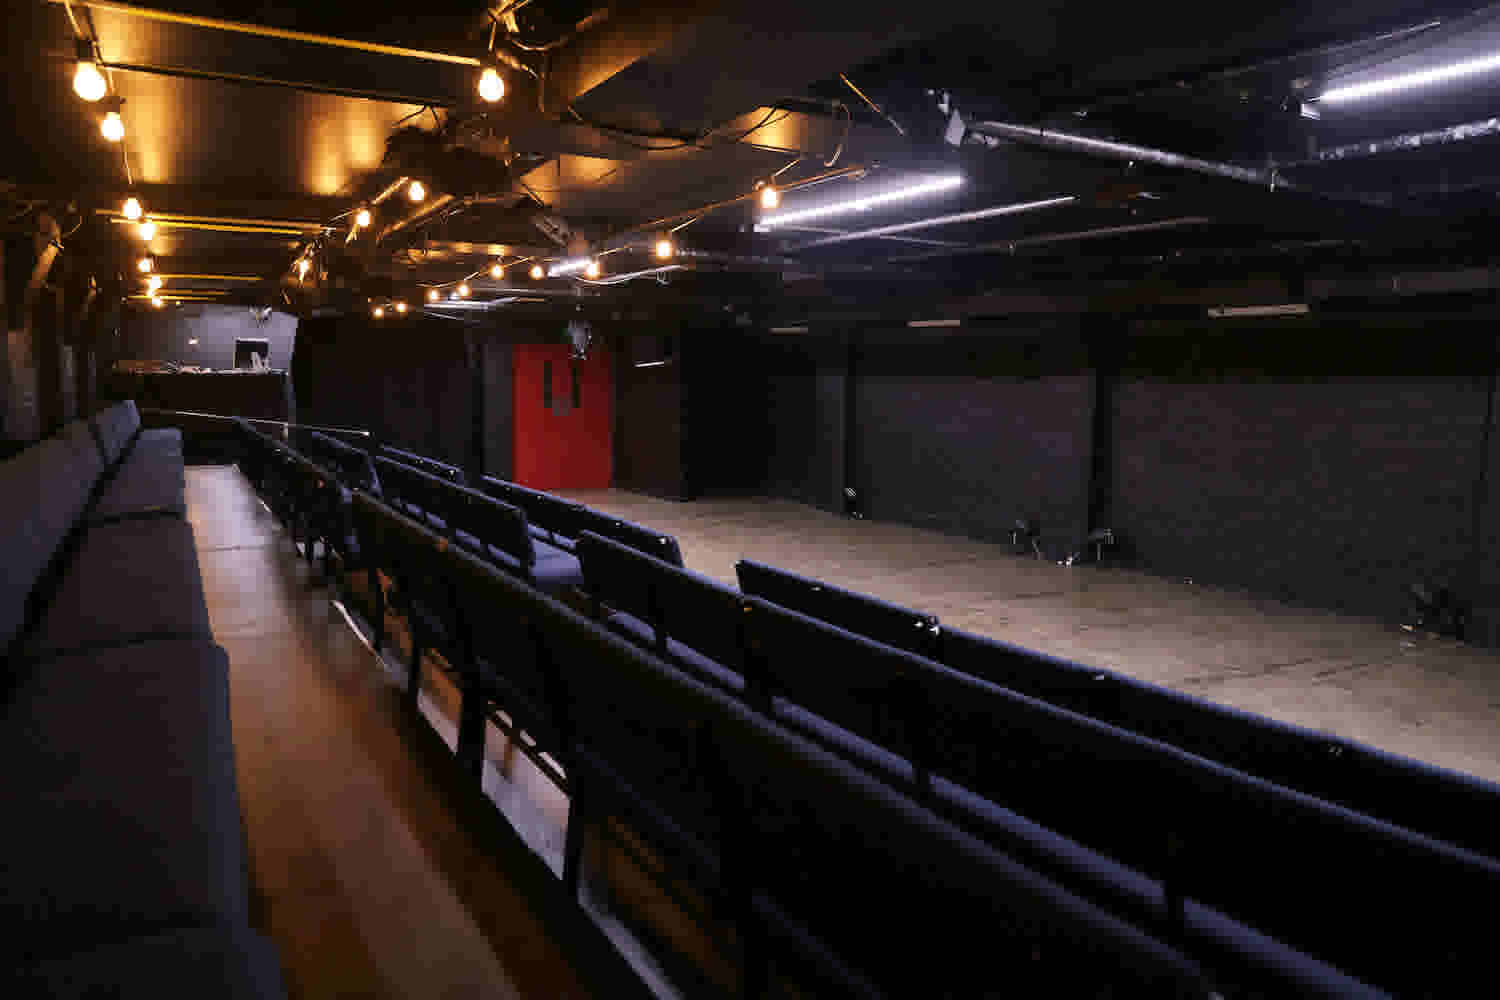 Basement Theatre's main Theatre space showing the seating block, stage, operating desk and entrance - taken from the back of the seating block. 